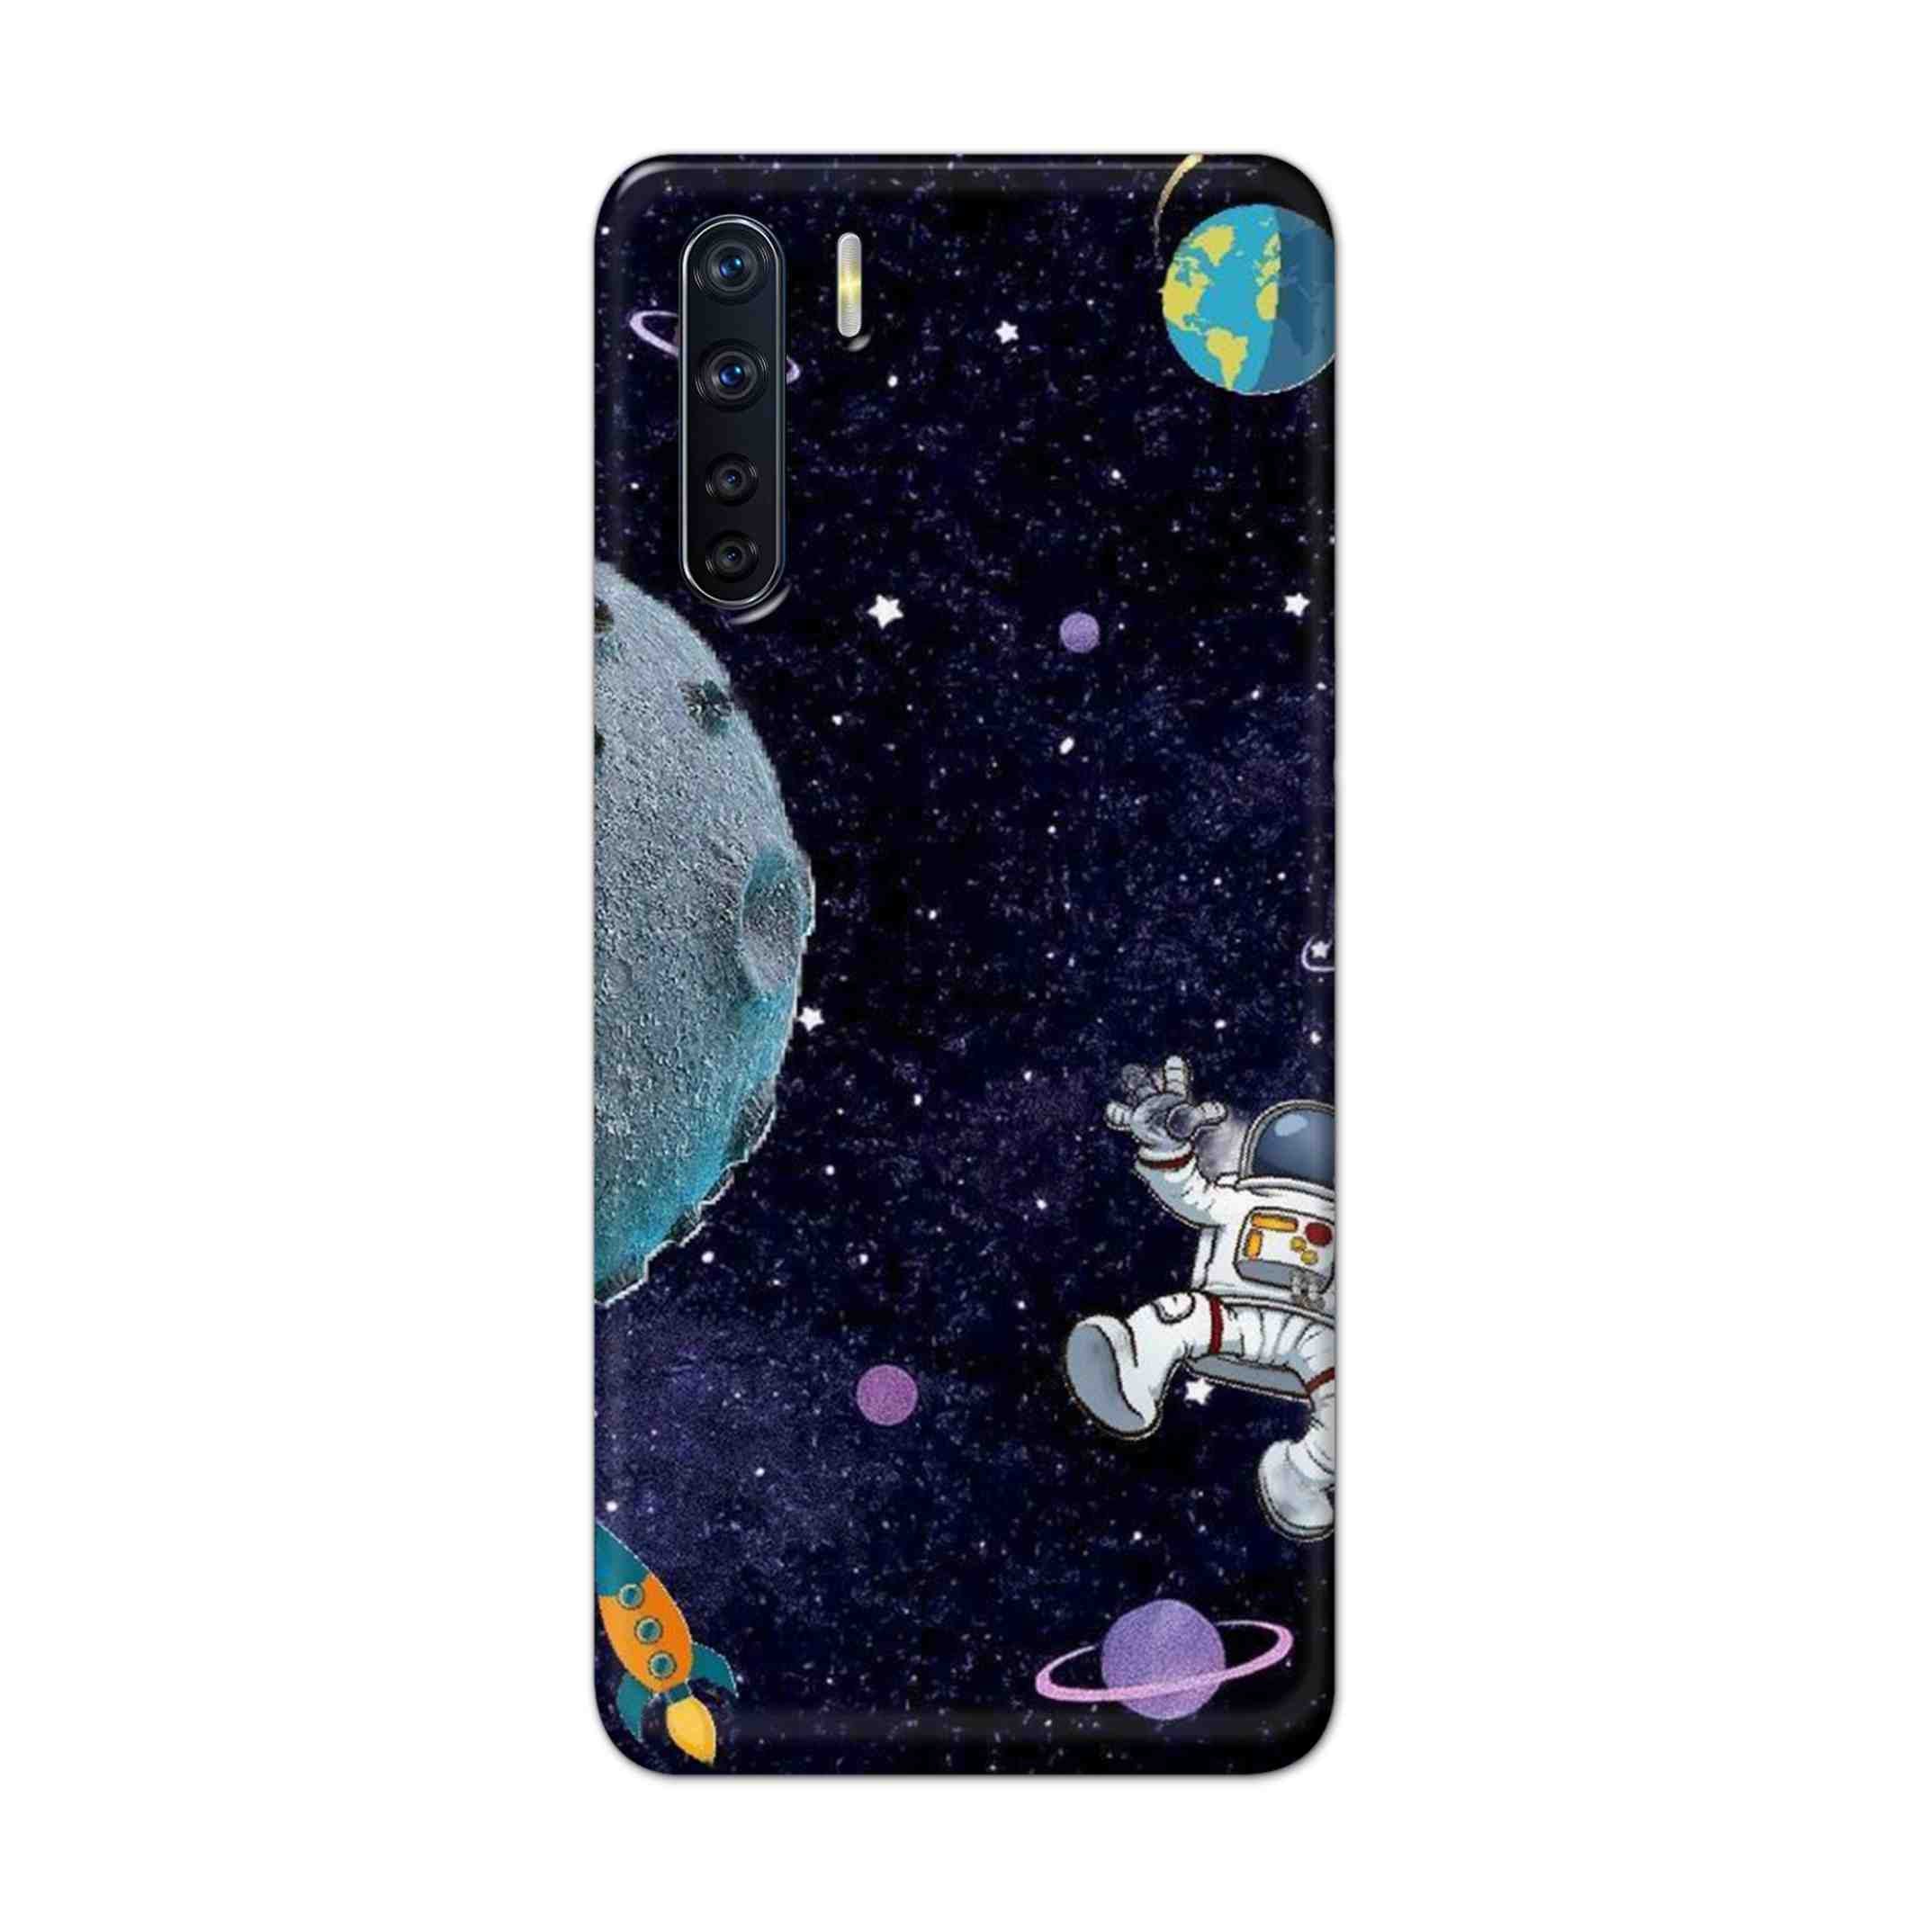 Buy Space Hard Back Mobile Phone Case Cover For OPPO F15 Online